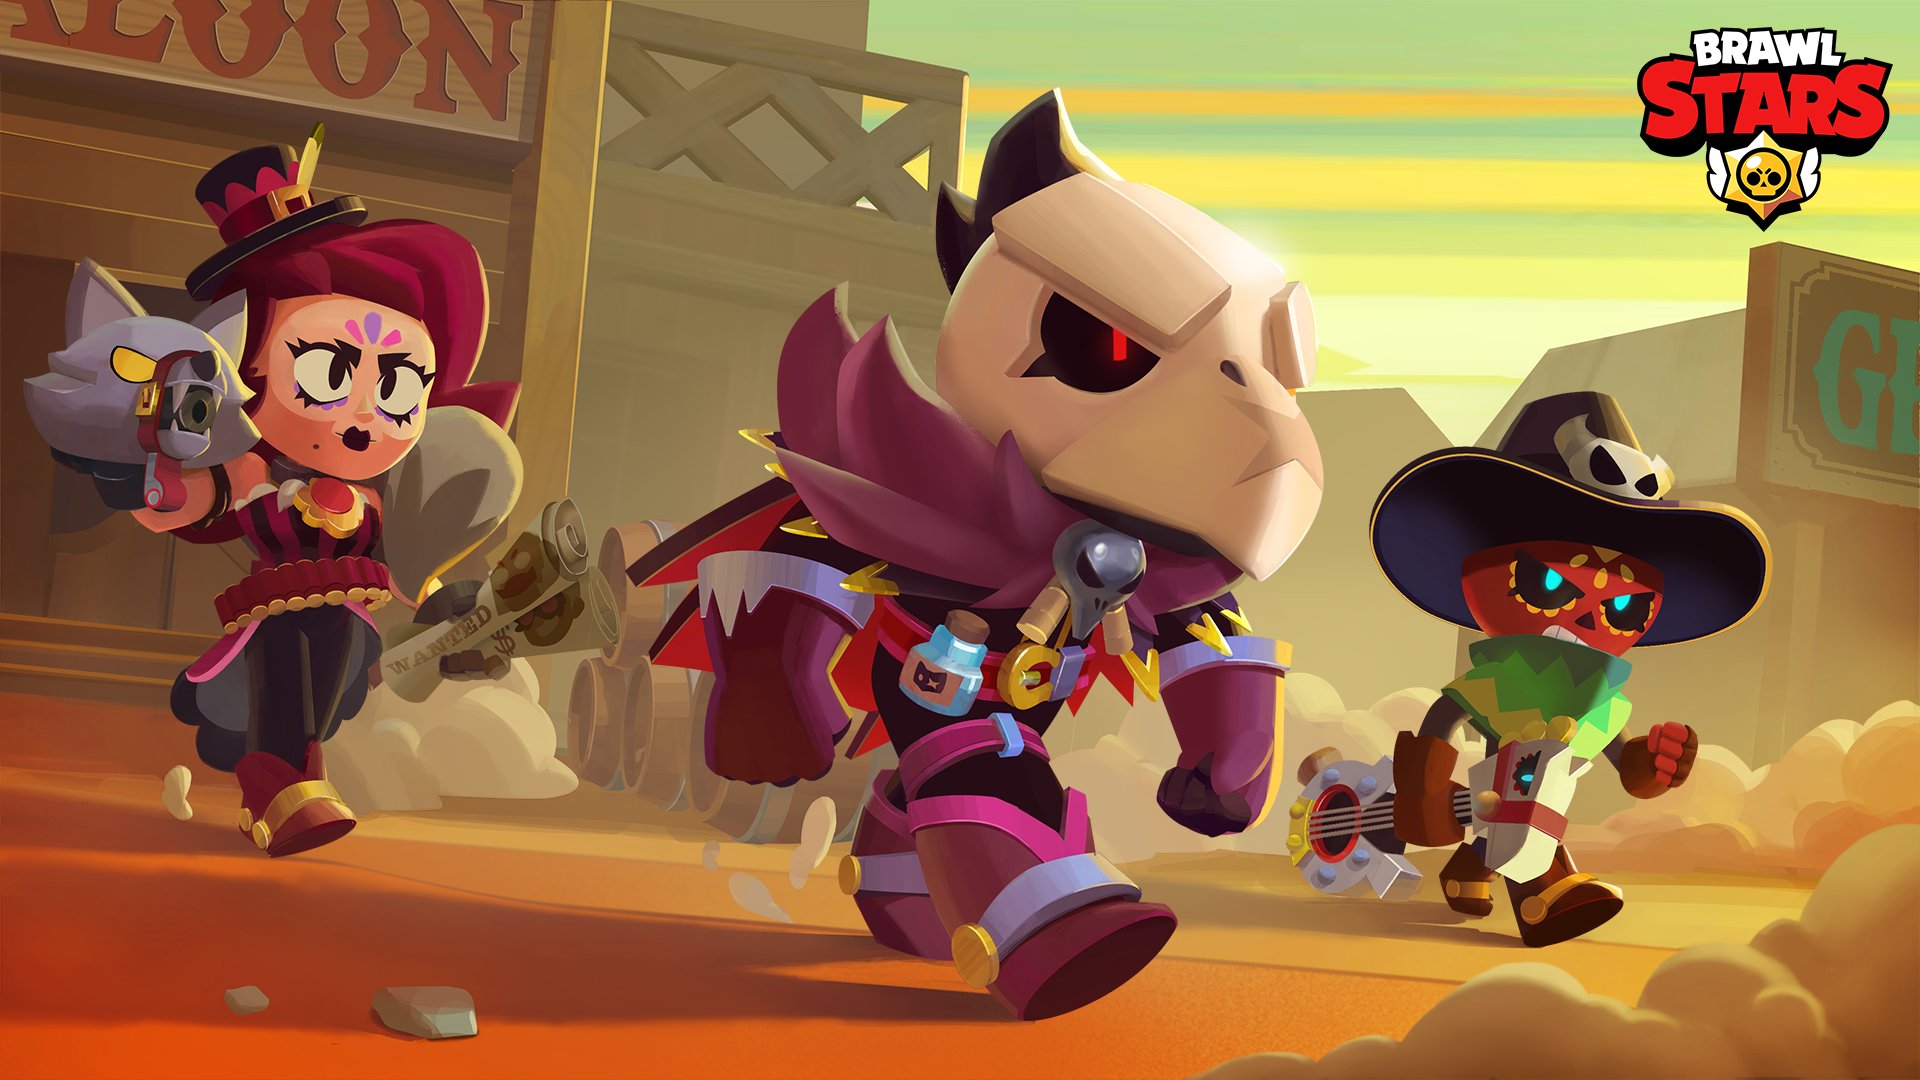 Brawl Stars on X: "Crowbone is here and looking for revenge! 😠 The Calamity Gang is now complete: 🗡 Crowbone in the Shop for Gems! Lawless Lola for 50 Power League